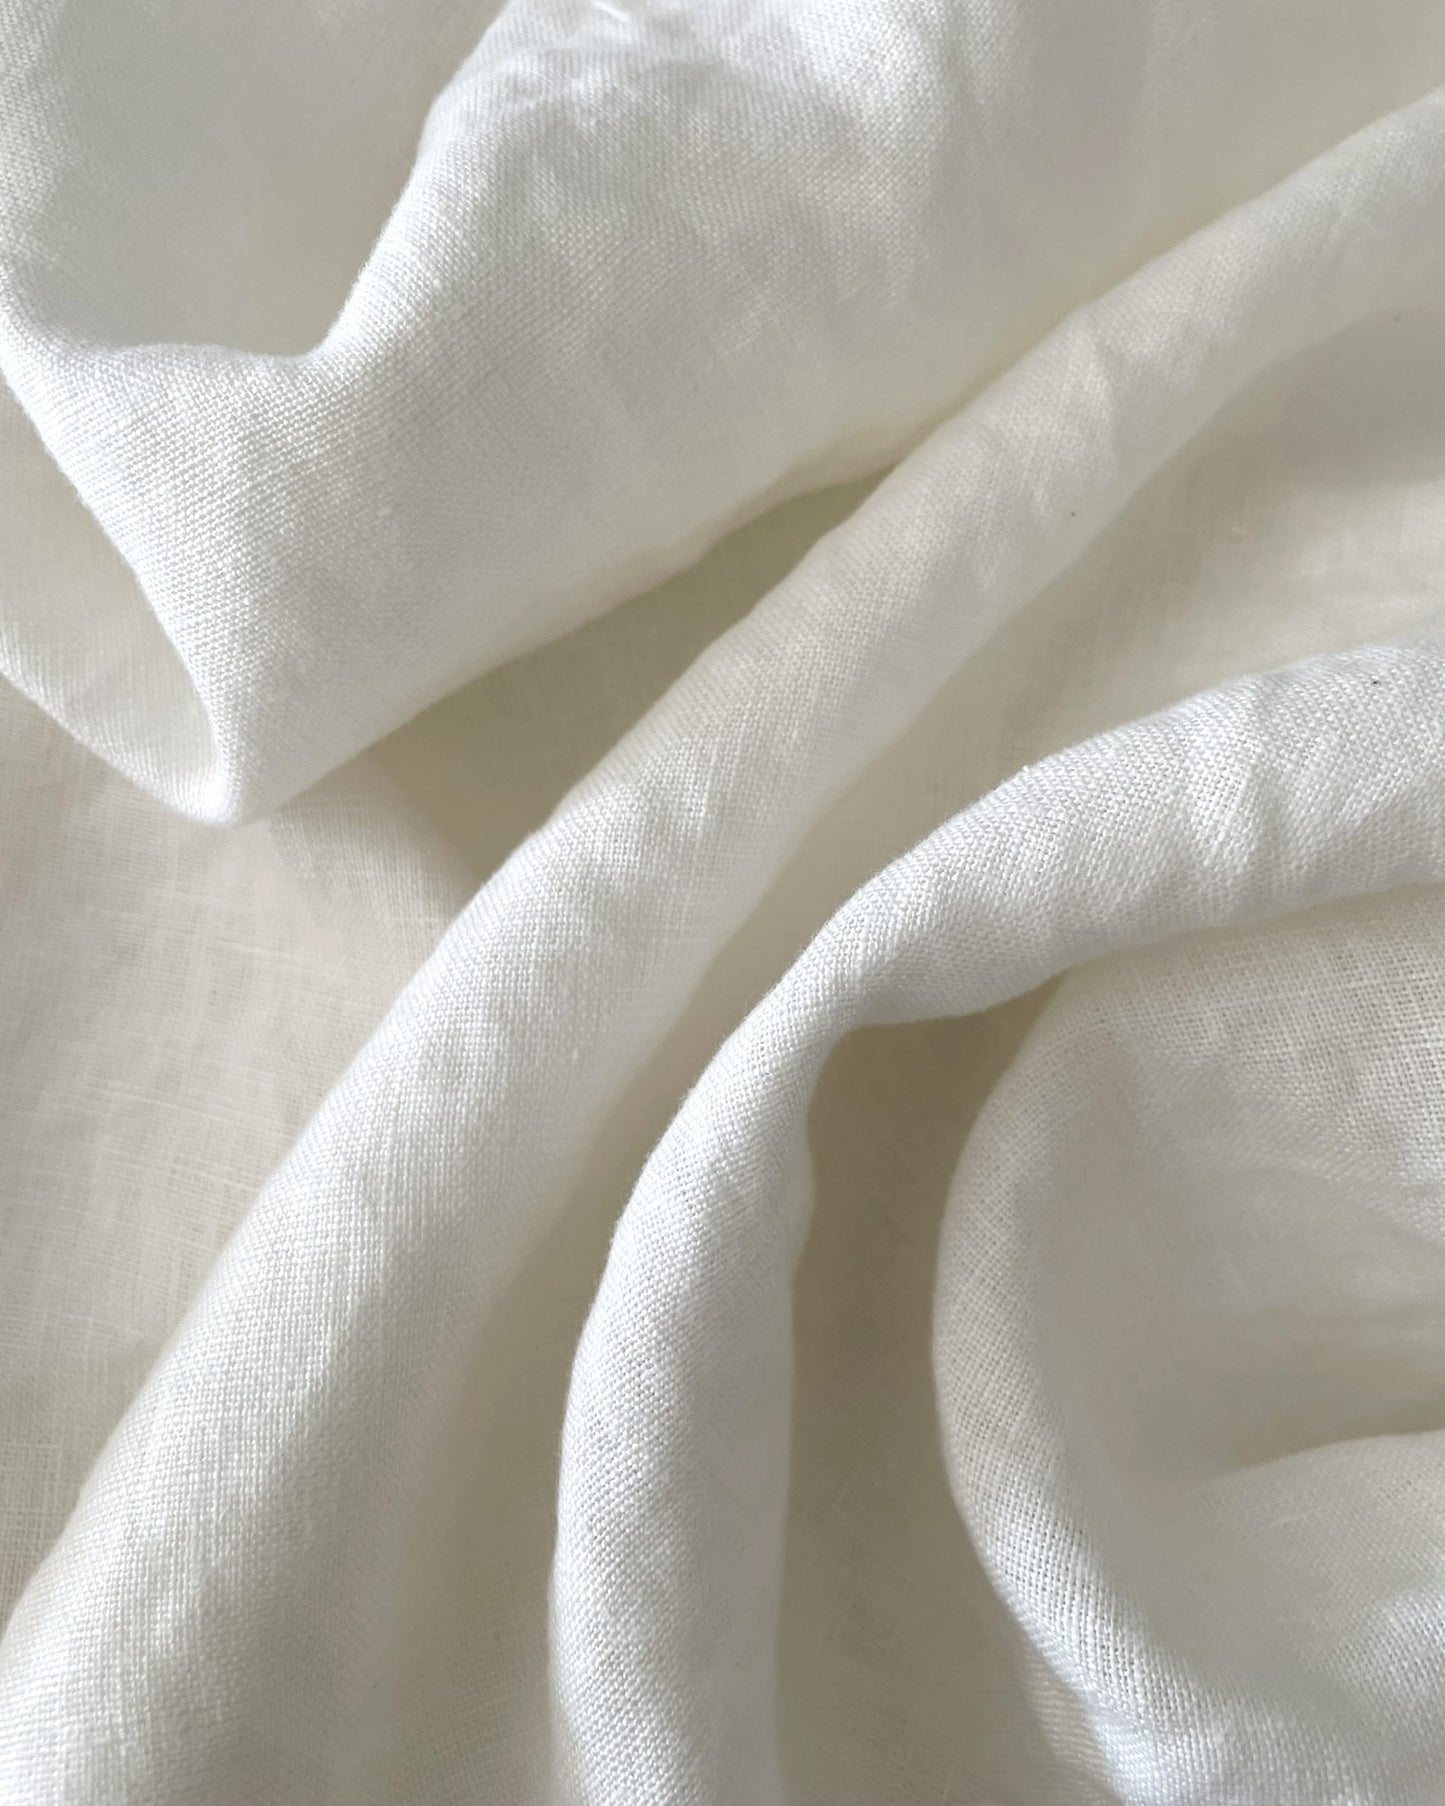 White Linen Scraps Bundle, Large Natural Linen Fabric Remnants For Craft Projects and Clothes, 145cm / 57 inches width